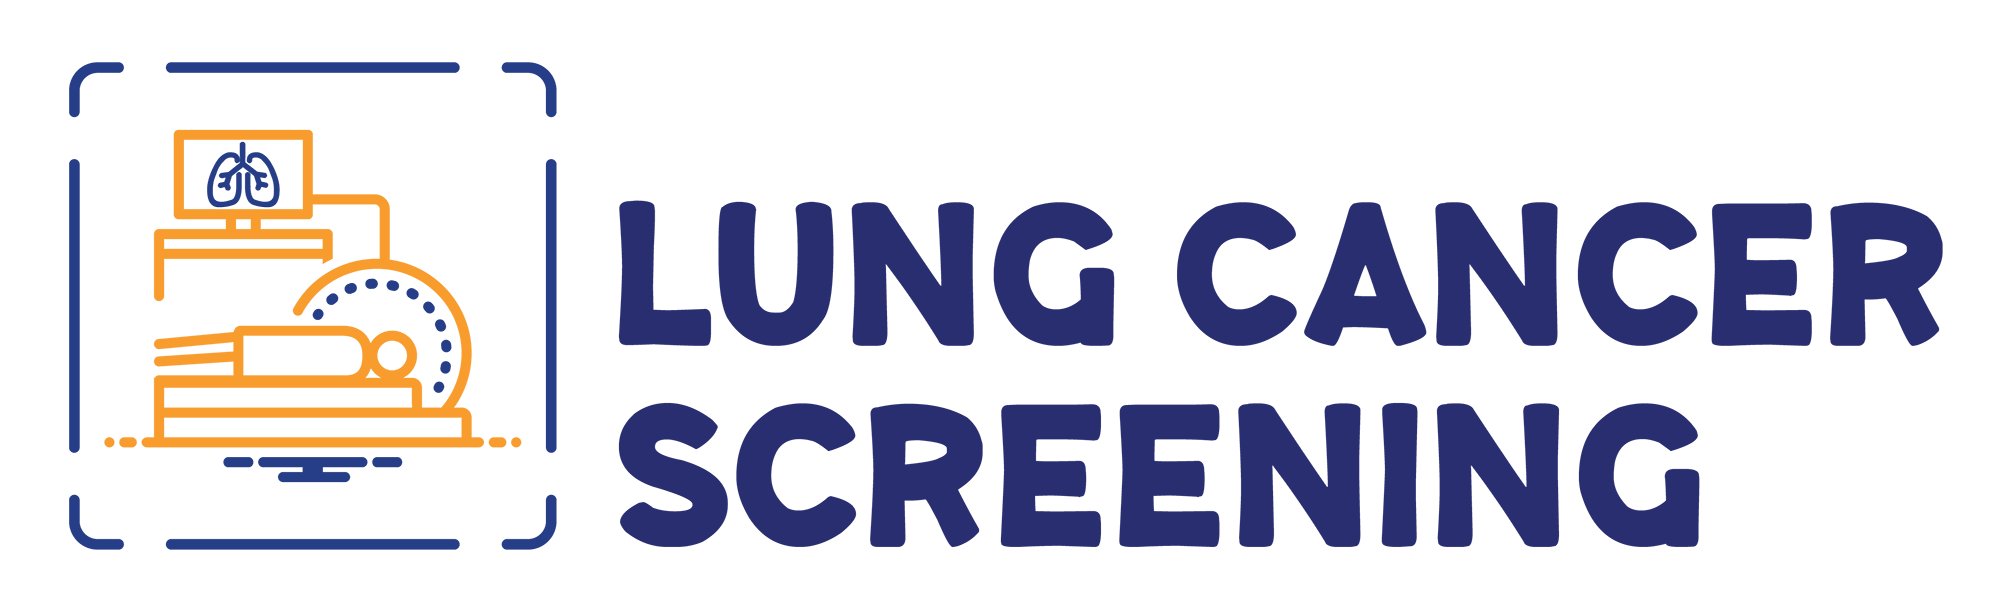 Lung Cancer Screening, New Jersey Imaging Network